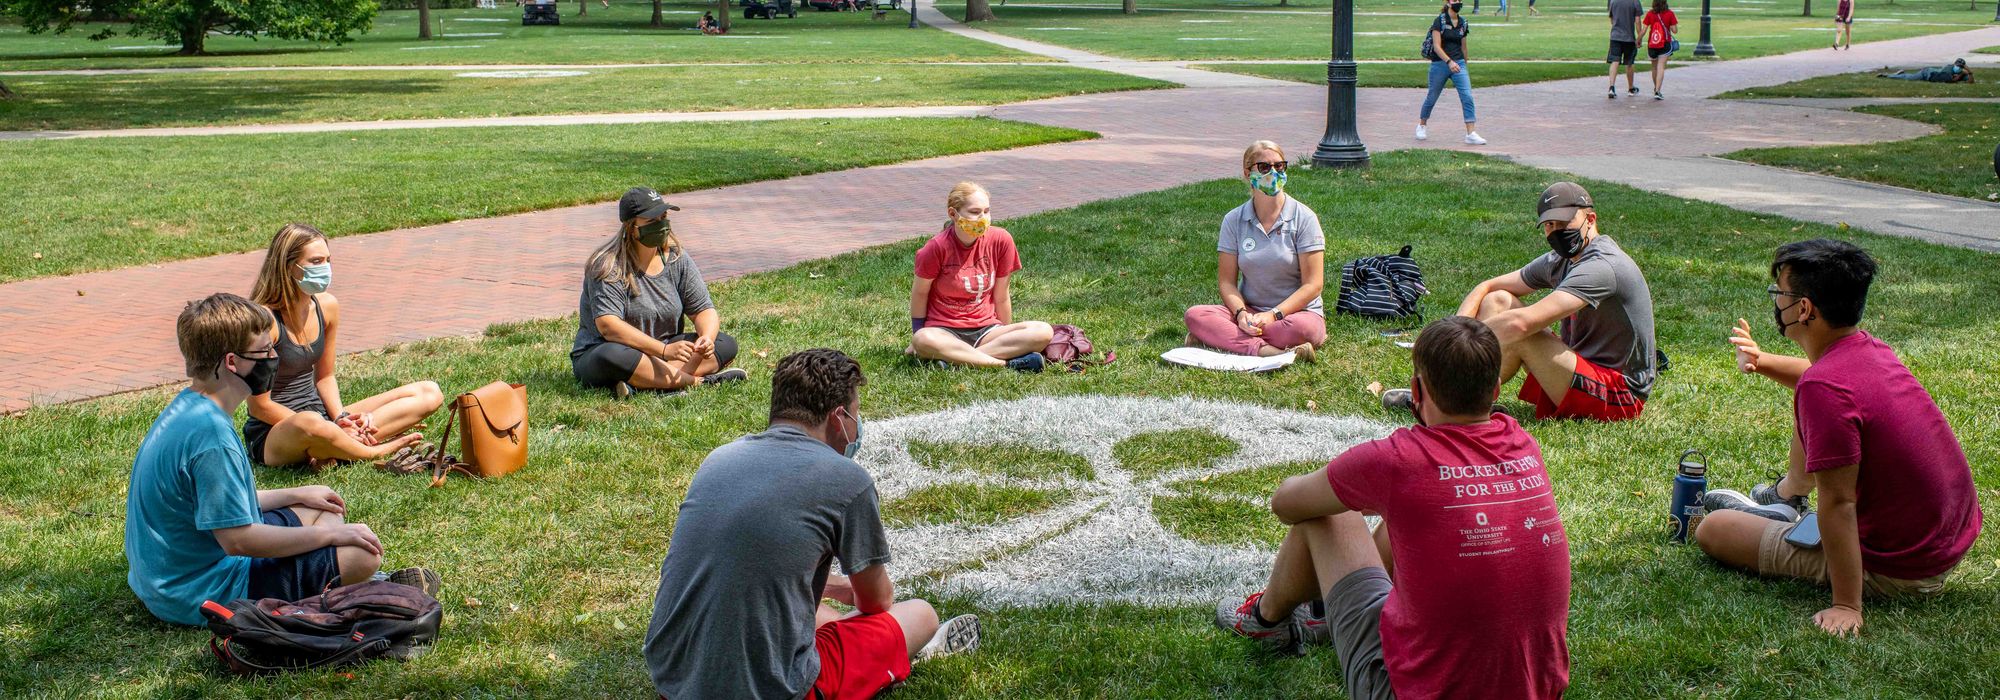 students sitting around a buckeye leaf painted on the oval to encourage social distancing